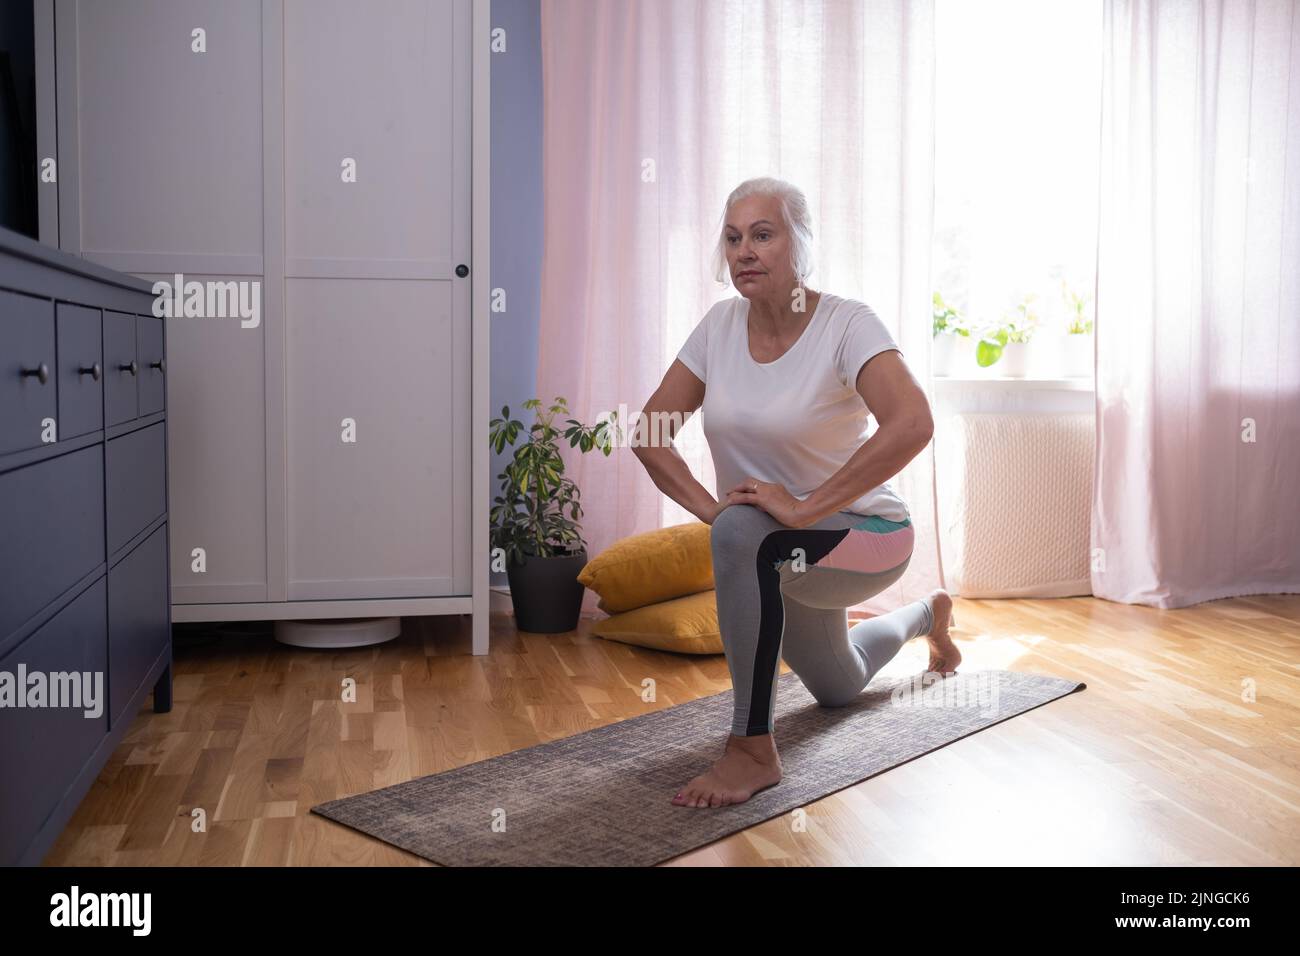 Senior aged woman sitting on the yoga mat and stretching her legs in the living room. Stock Photo